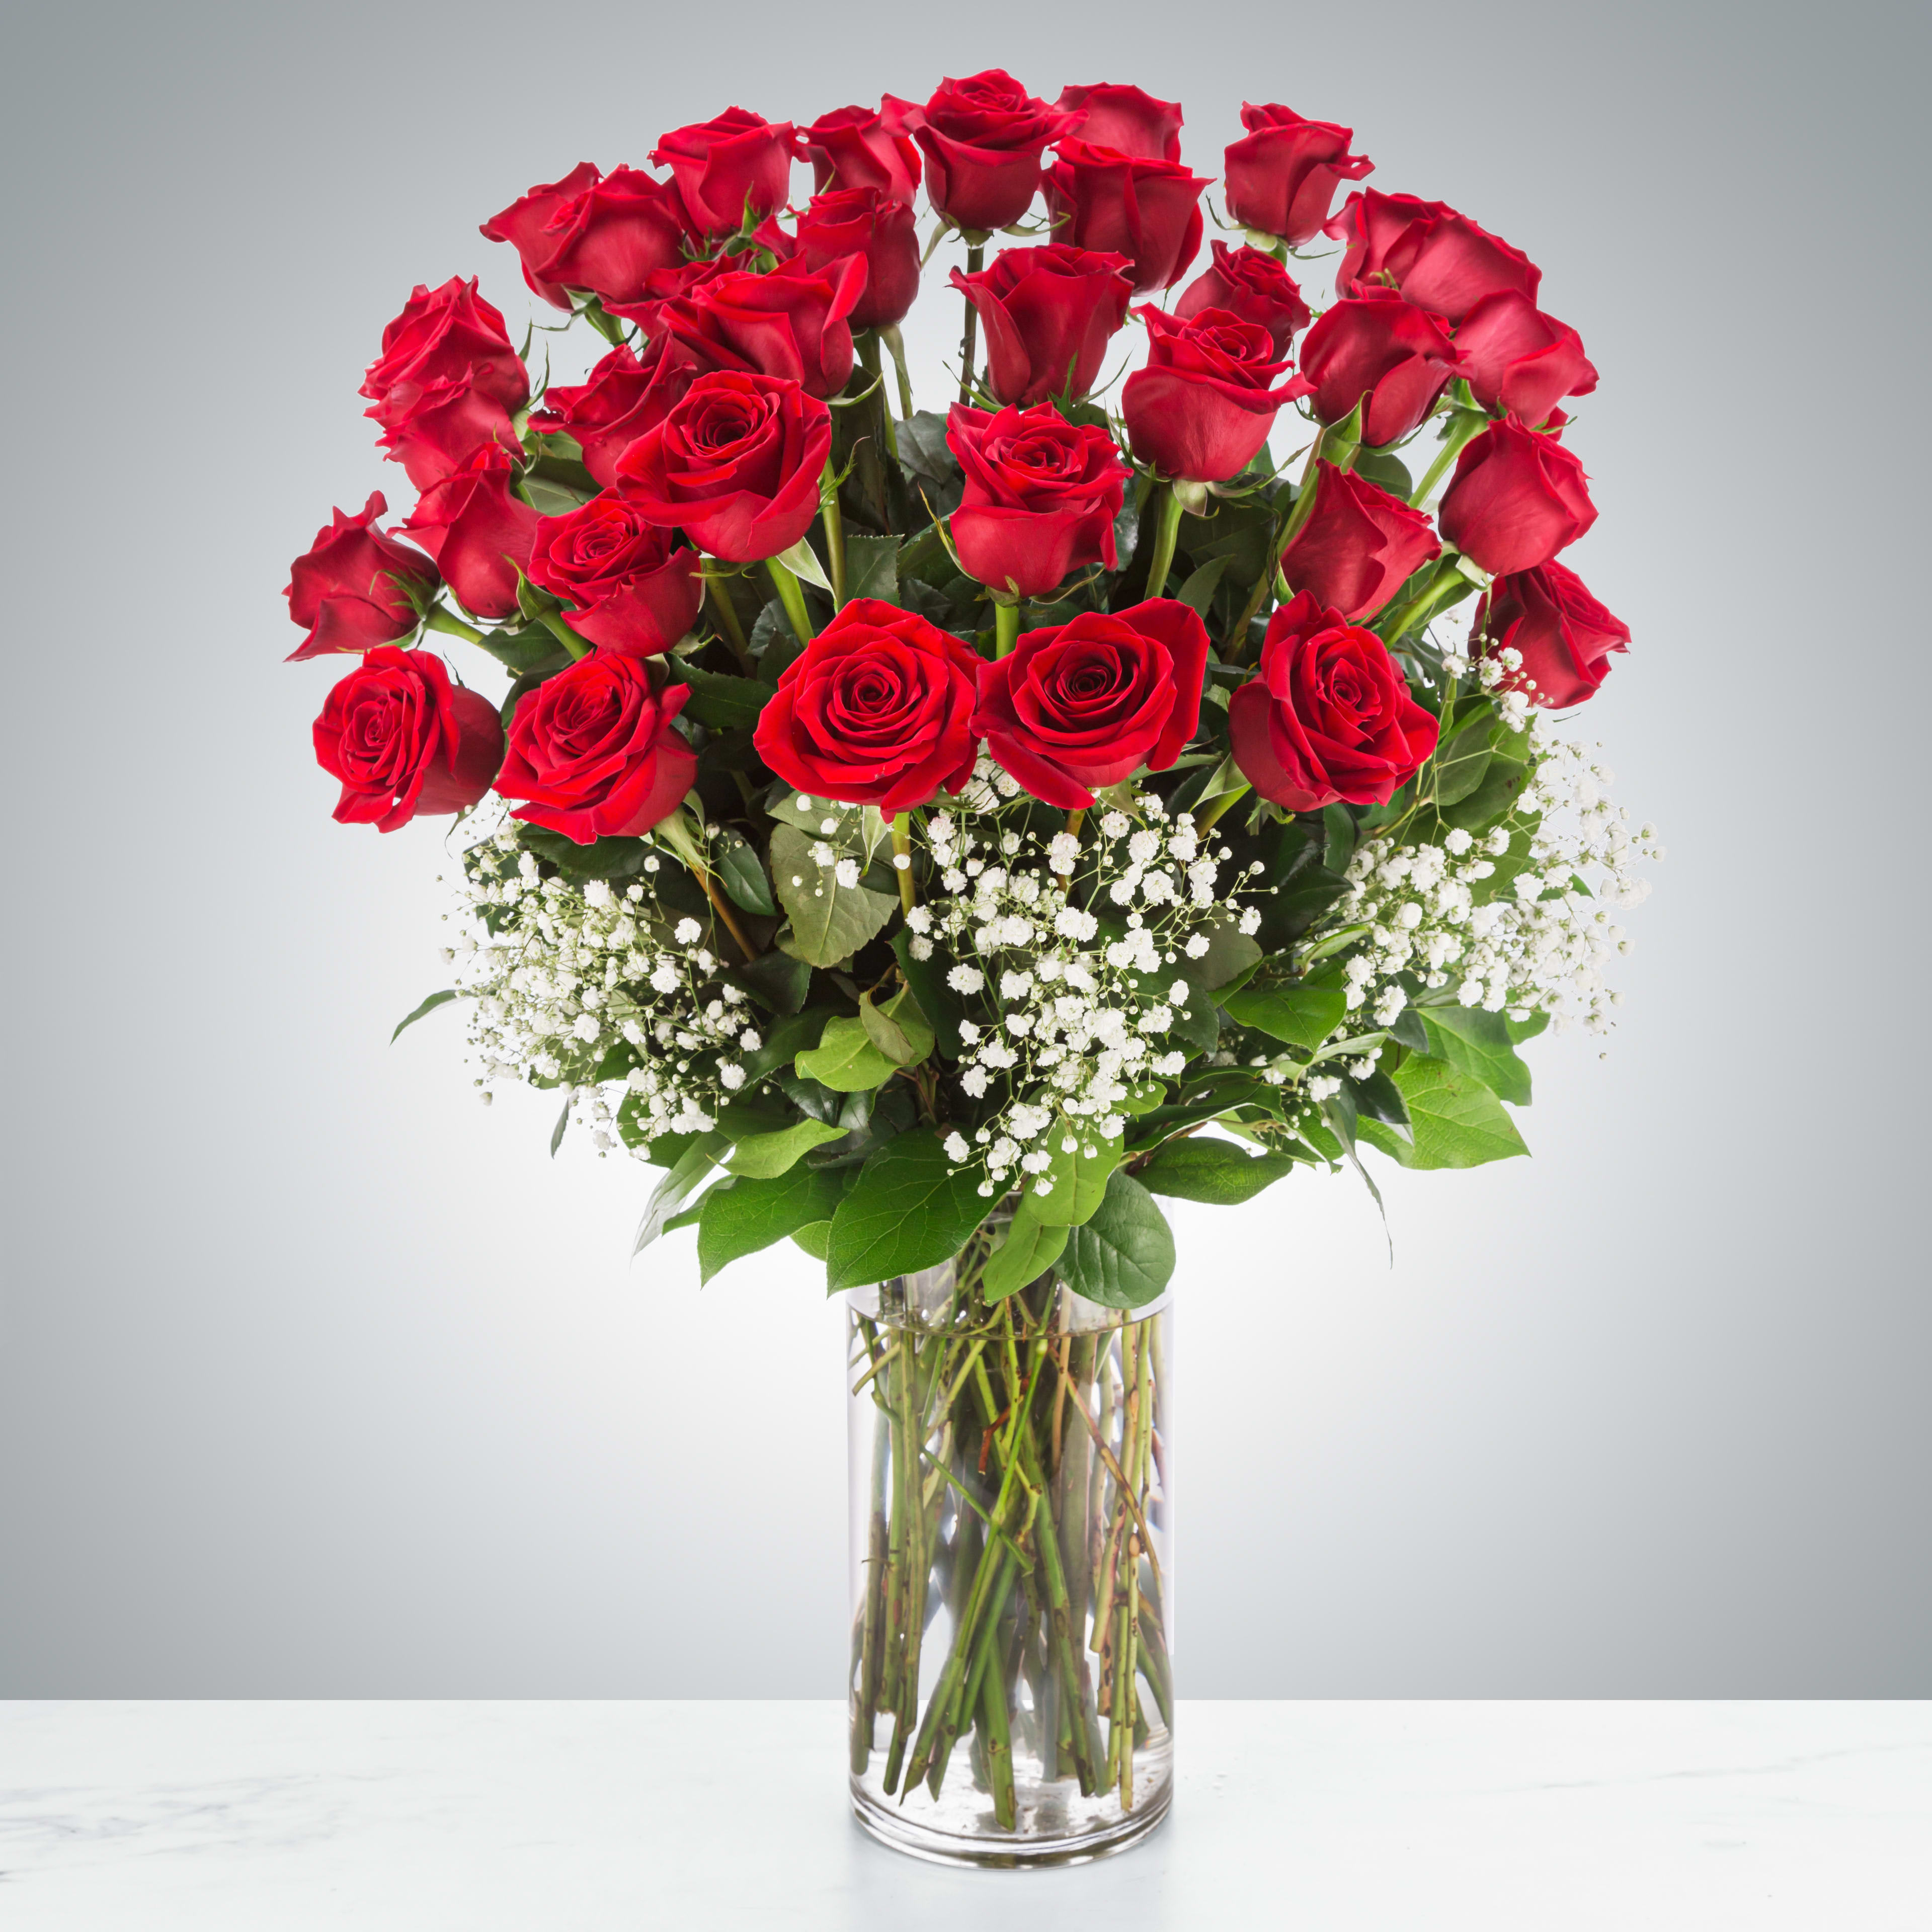 Grandeur 3 dozen Long Stem Rose Arrangement by BloomNation™ - Go big with your love. Send the most extravagant 3 dozen red rose arrangement for Valentine's day, anniversary celebrations, or declarations of love. This luxury arrangement makes a big statement of &quot;I love you&quot; in 36 roses.  Approximate Dimensions: 20&quot;D x 32&quot;H